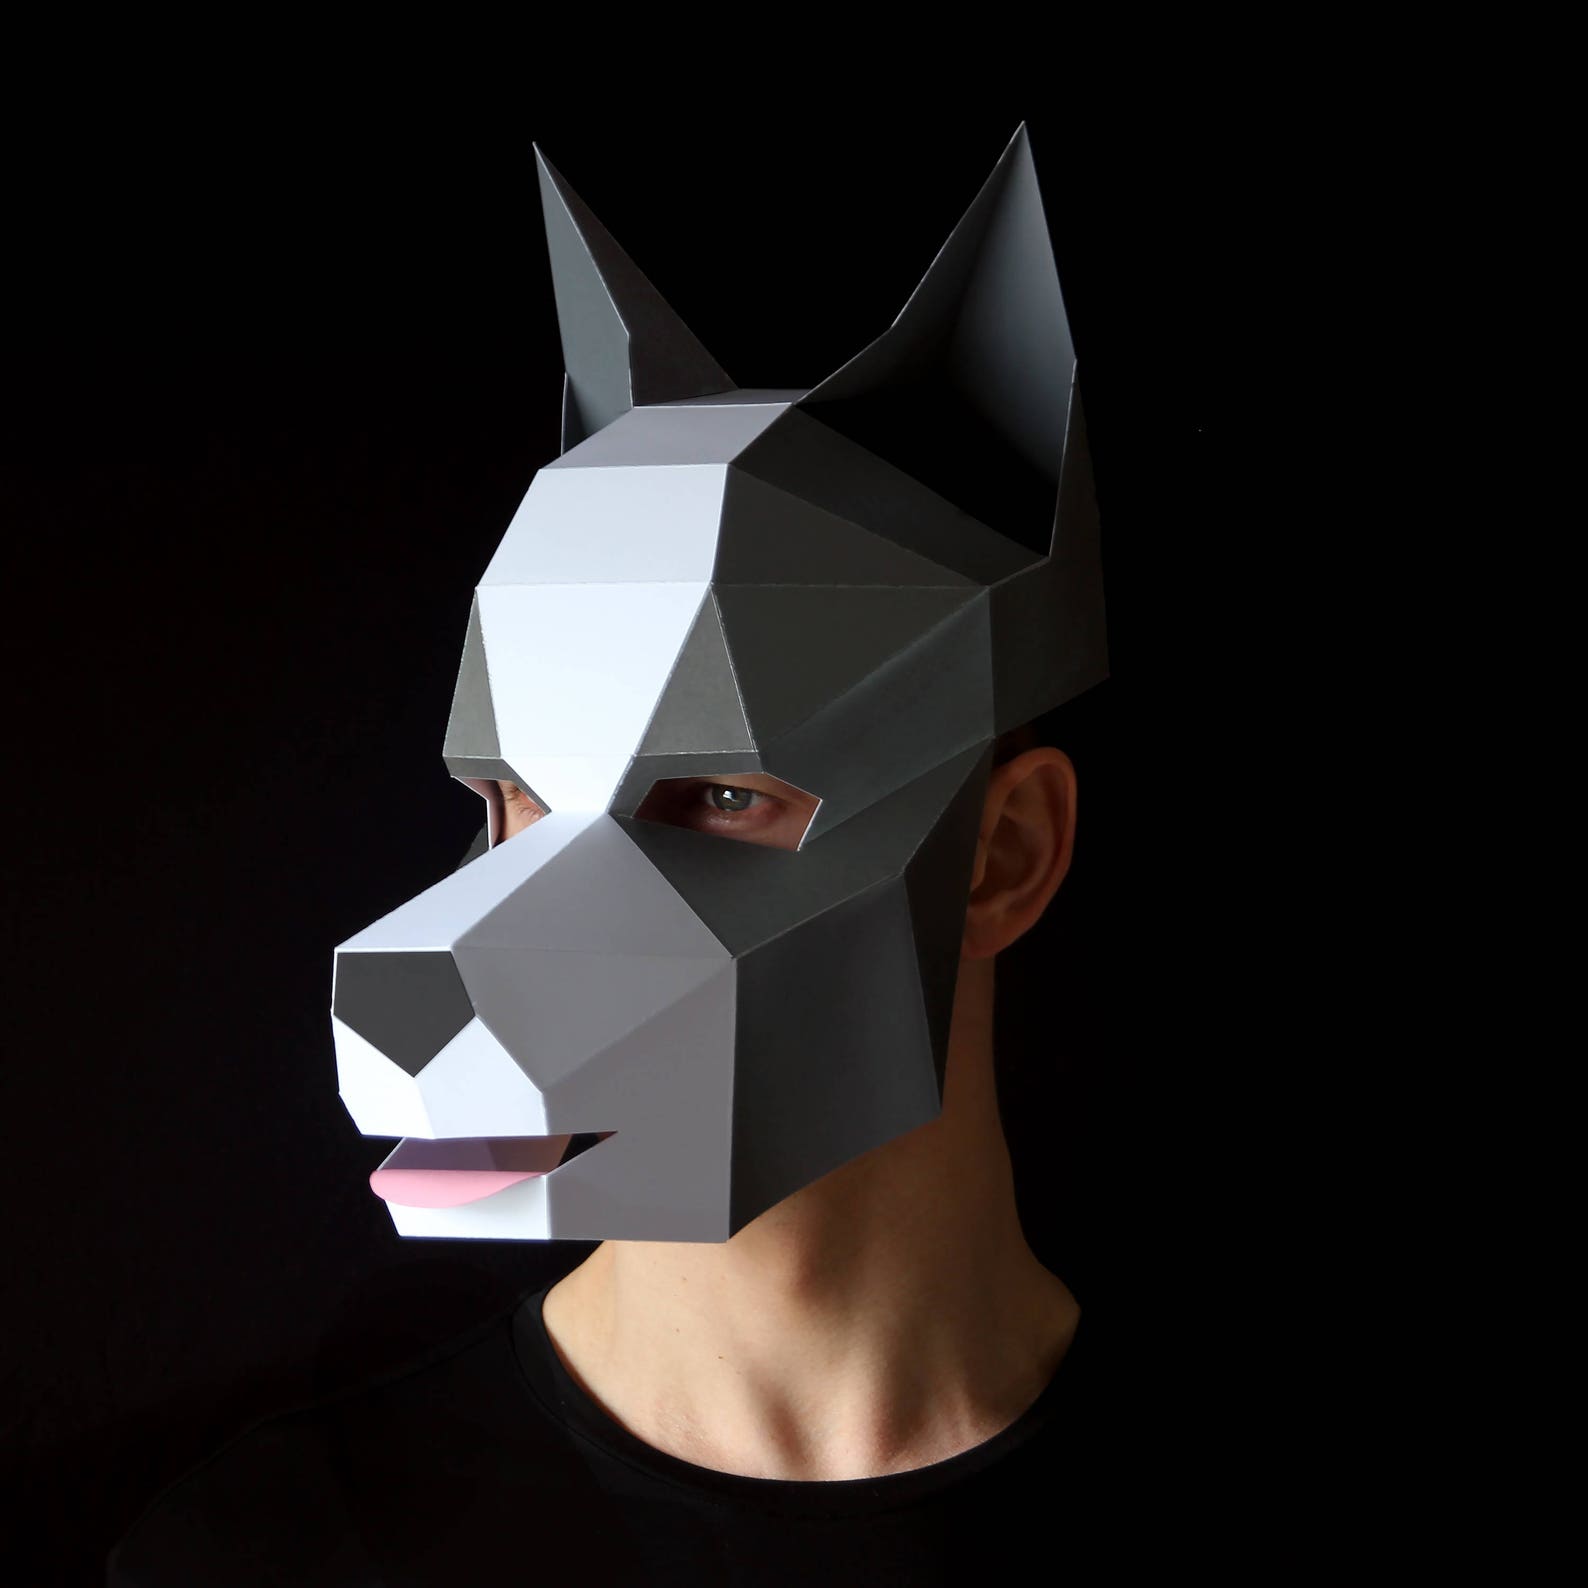 DOG Mask Build Your Own 3D Dog Mask From Card Using This - Etsy